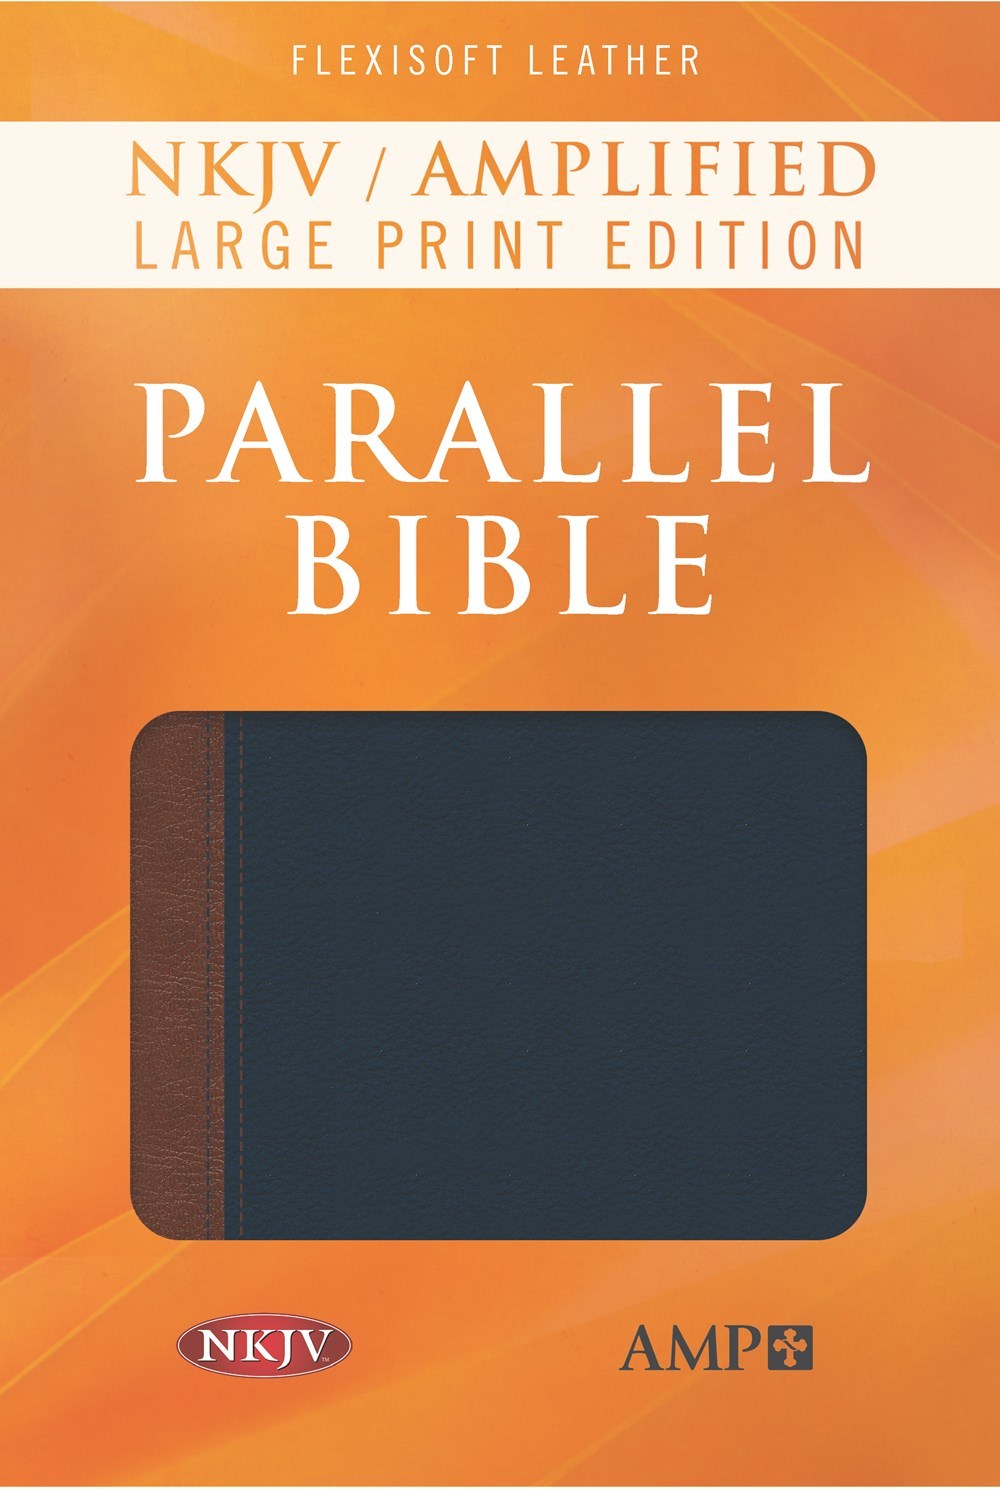 Seed of Abraham Christian Bookstore - (In)Courage - NKJV/Amplified Parallel Bible/Large Print-Blue/Brown Flexisoft Leather